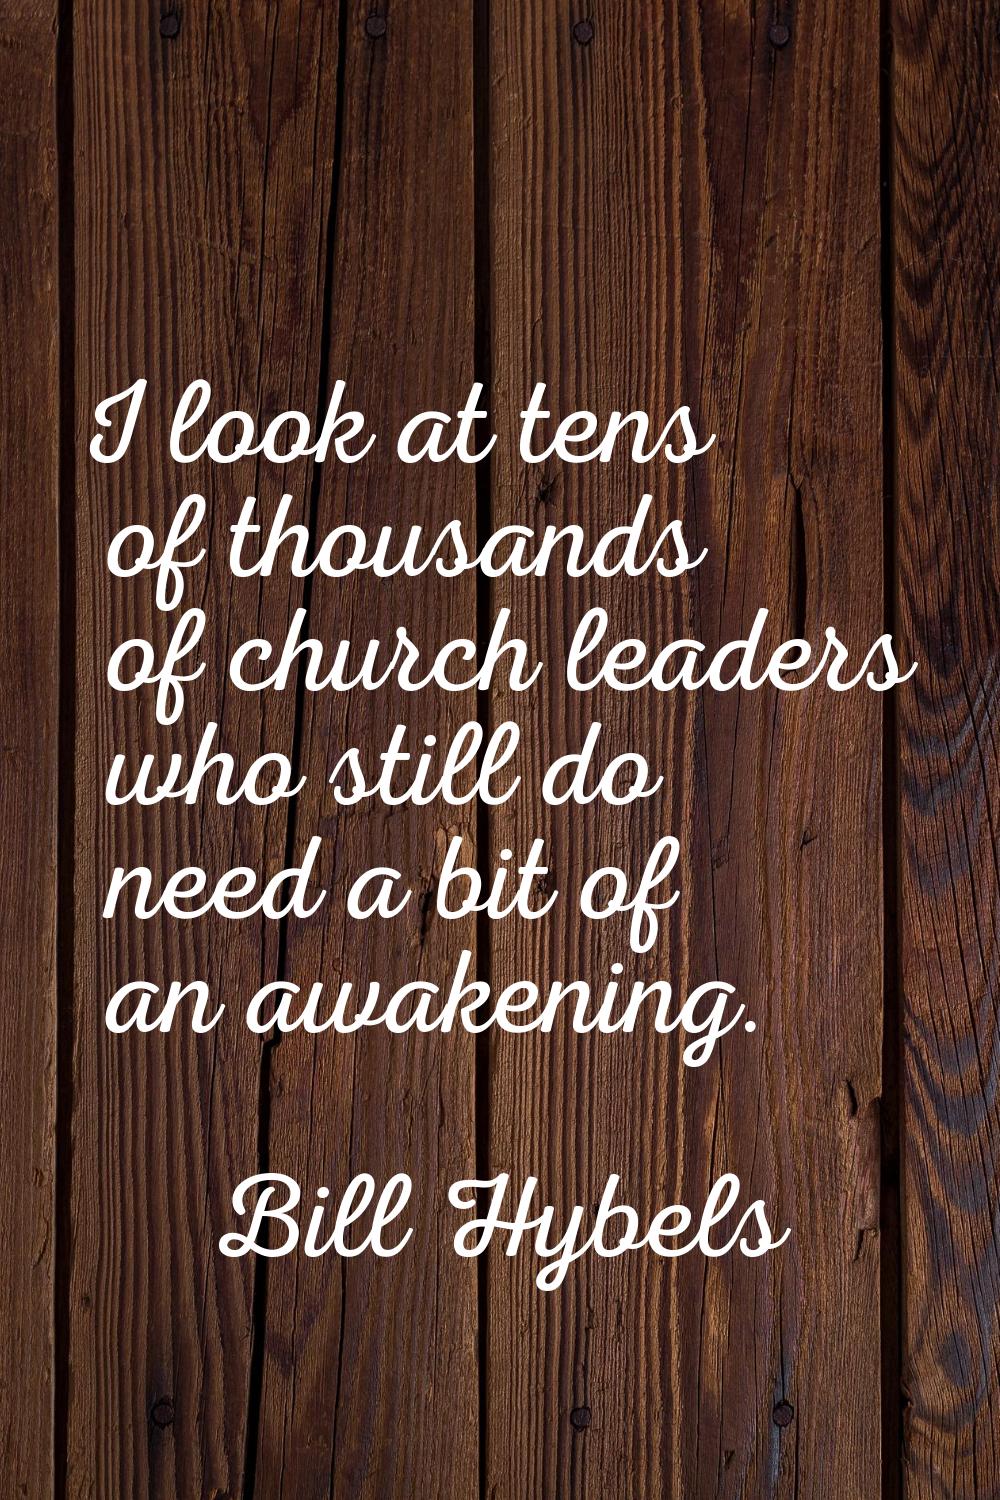 I look at tens of thousands of church leaders who still do need a bit of an awakening.